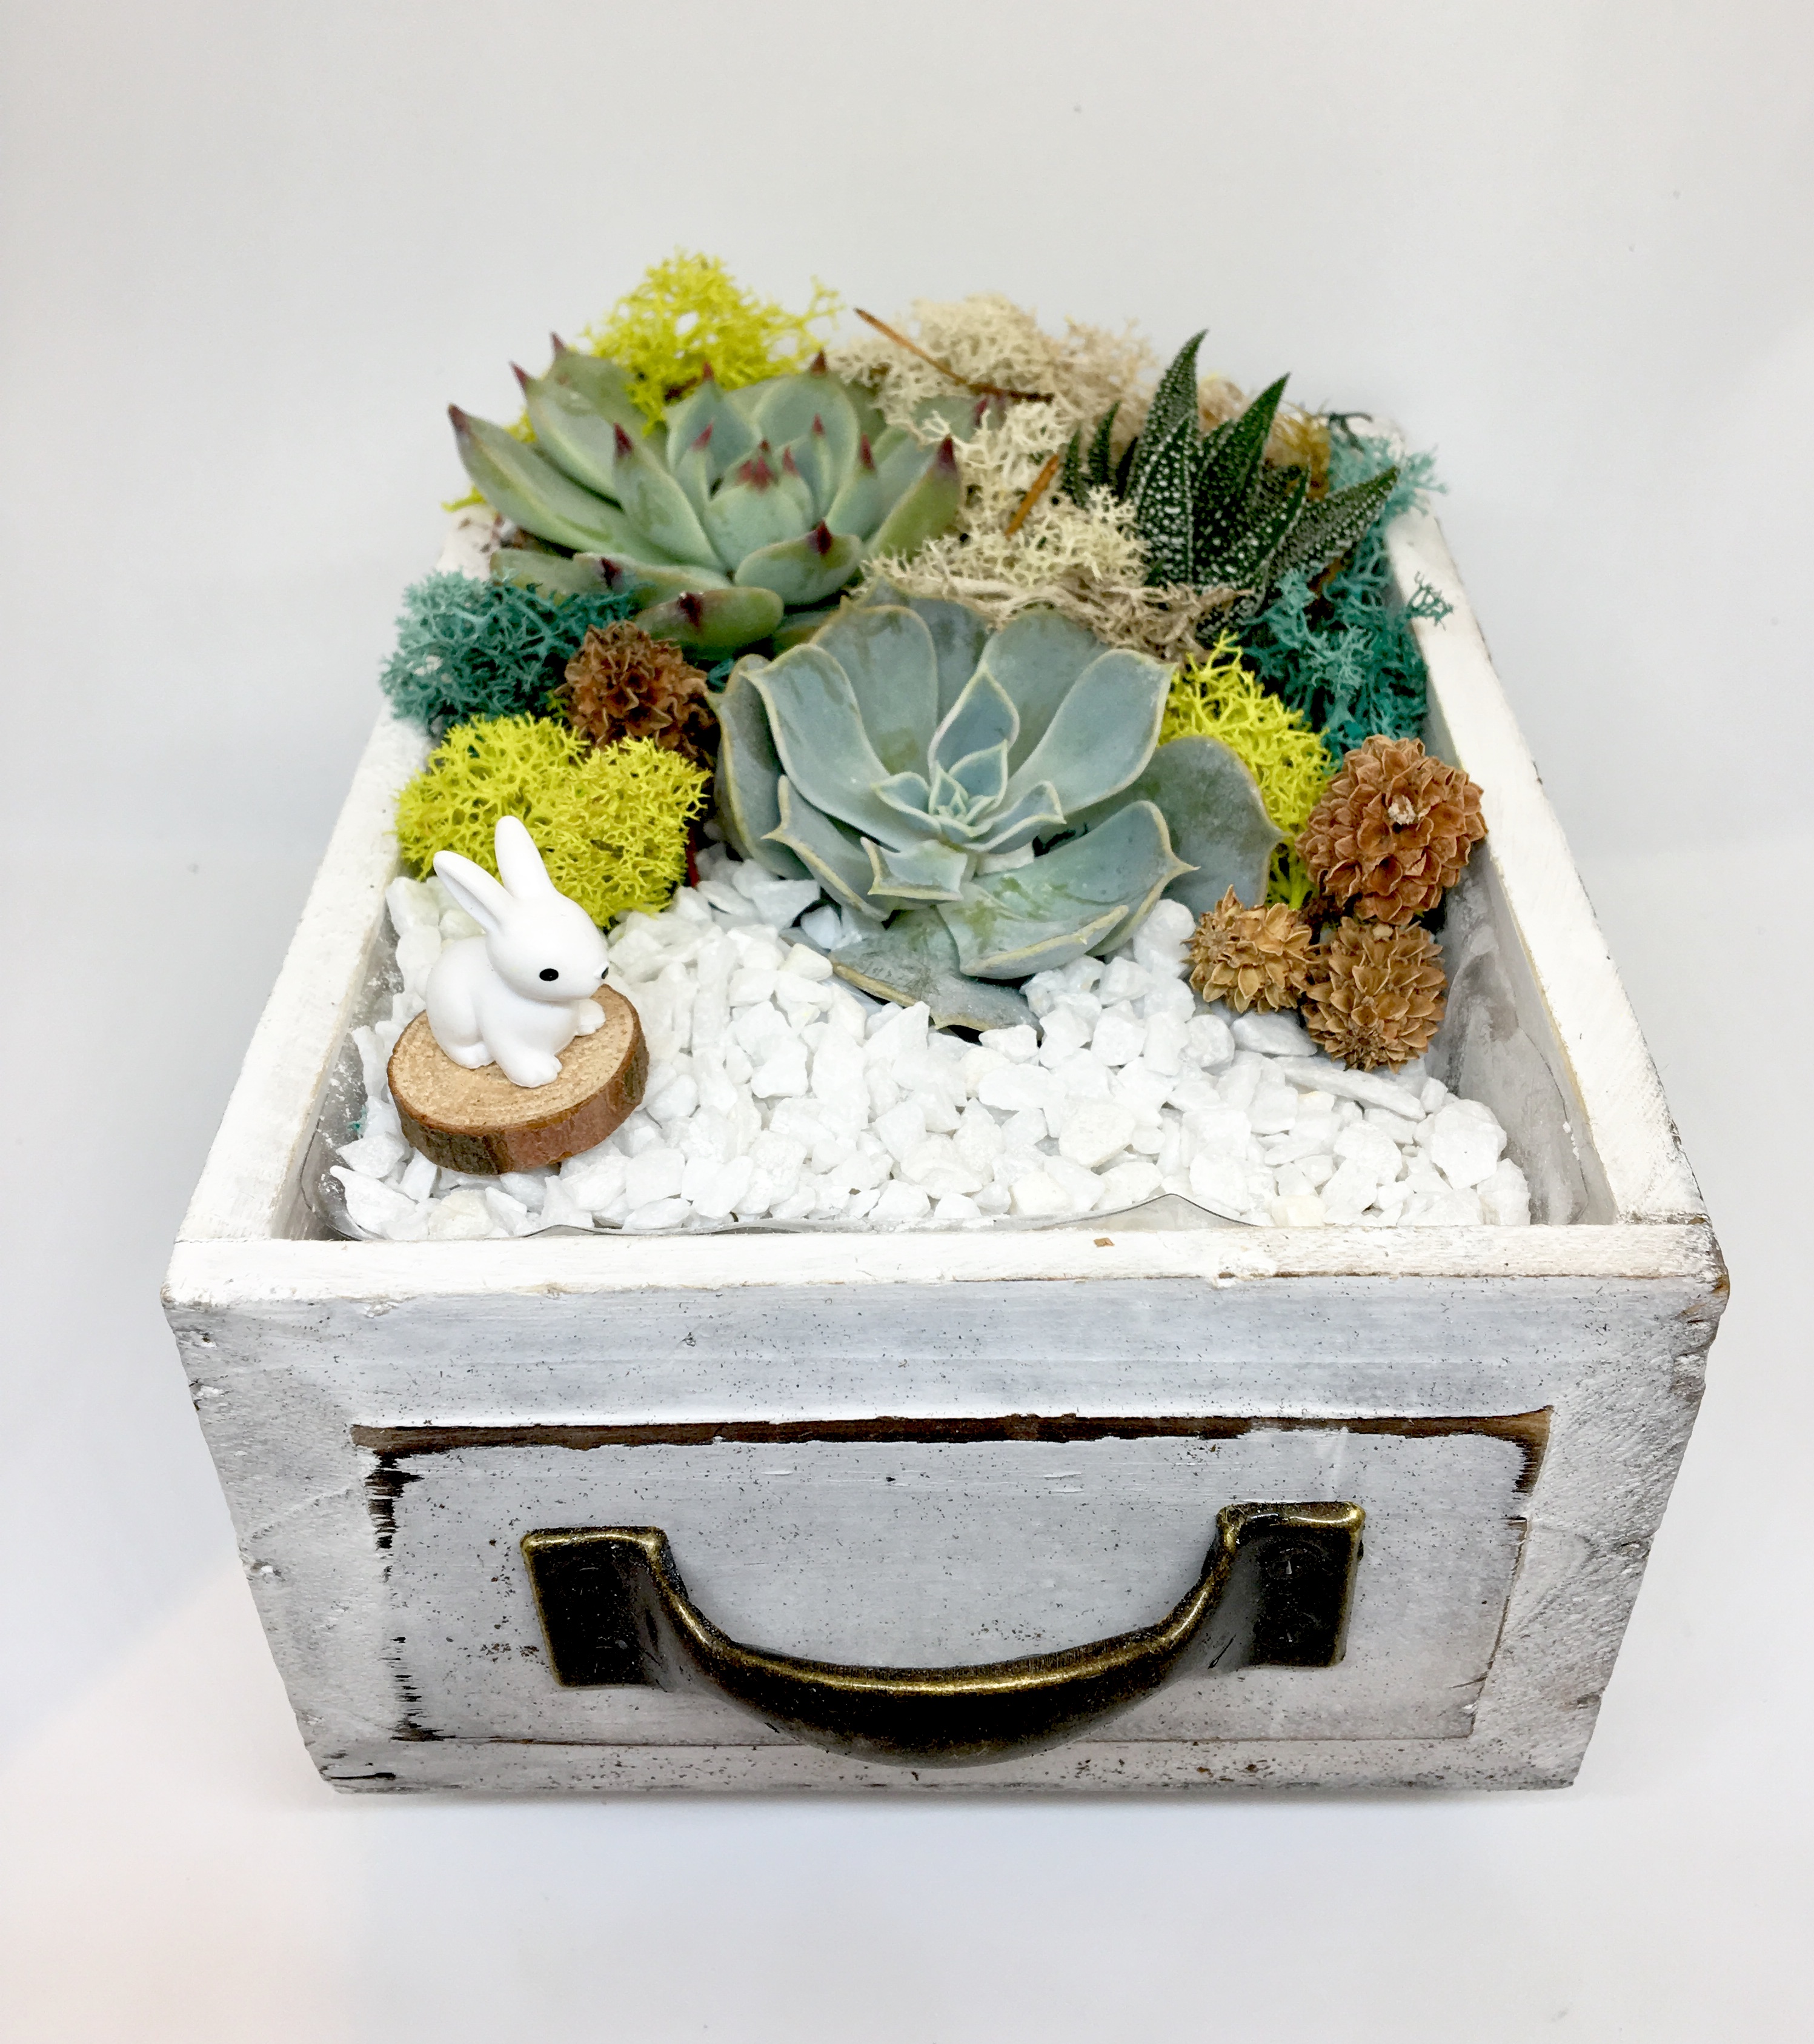 A Bunny Wood Drawer plant nite project by Yaymaker